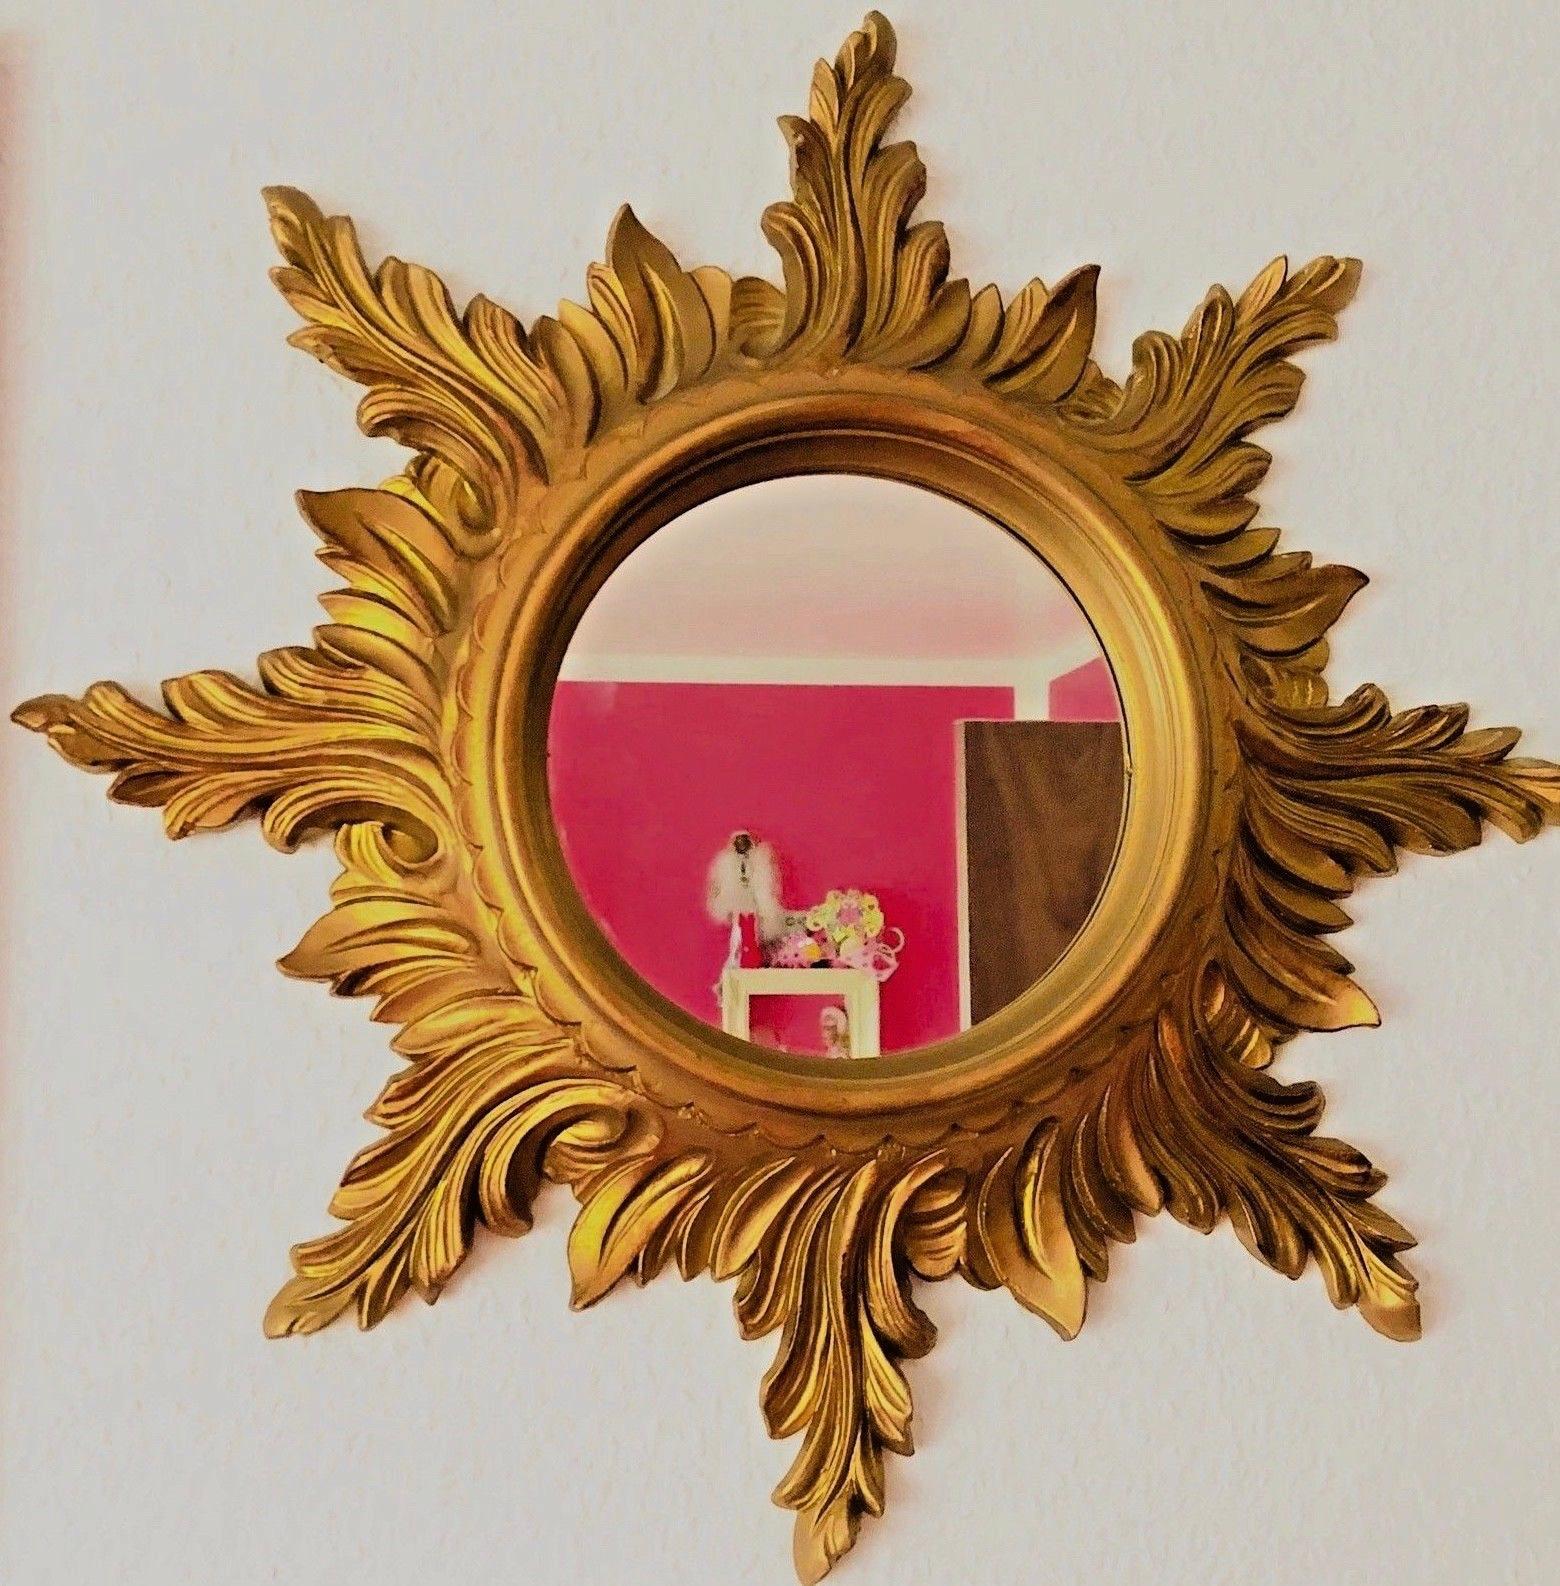 A gorgeous starburst mirror. Made of plastic or resin. No chips, no cracks, no repairs. It measures approximate 19 3/4